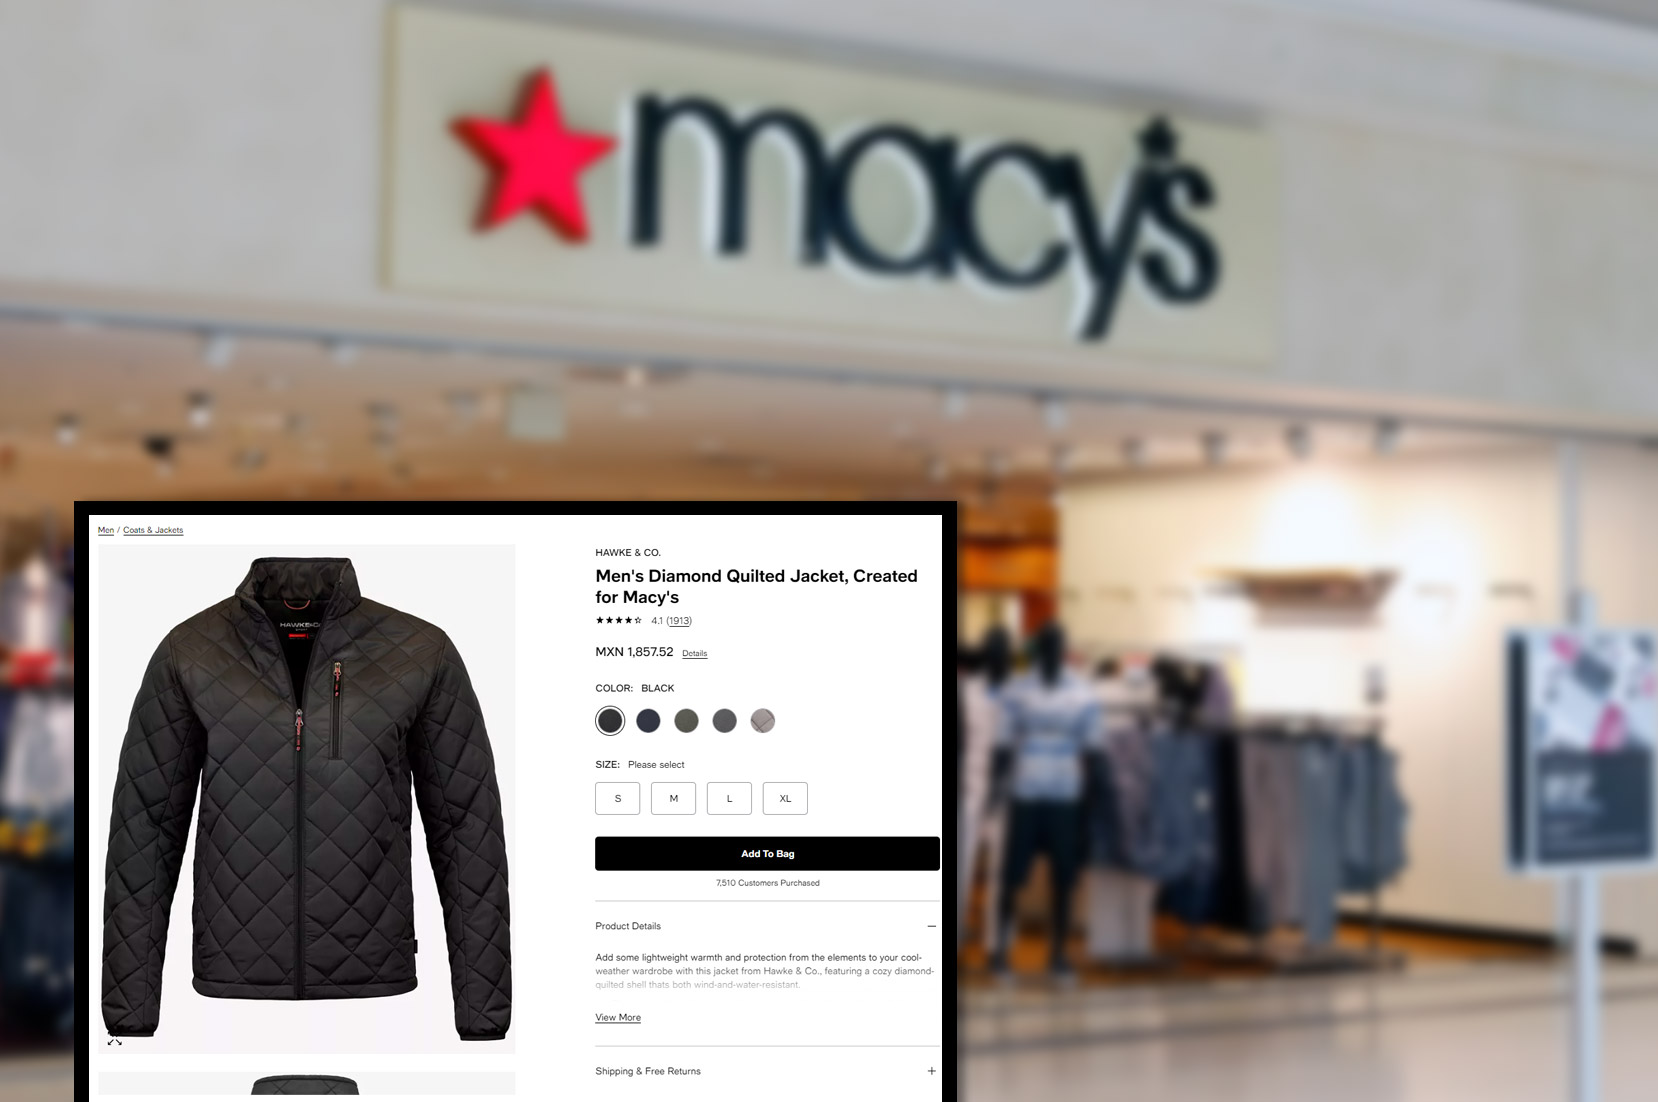 macys-comproduct-pricing-information-and-image-scraping-services